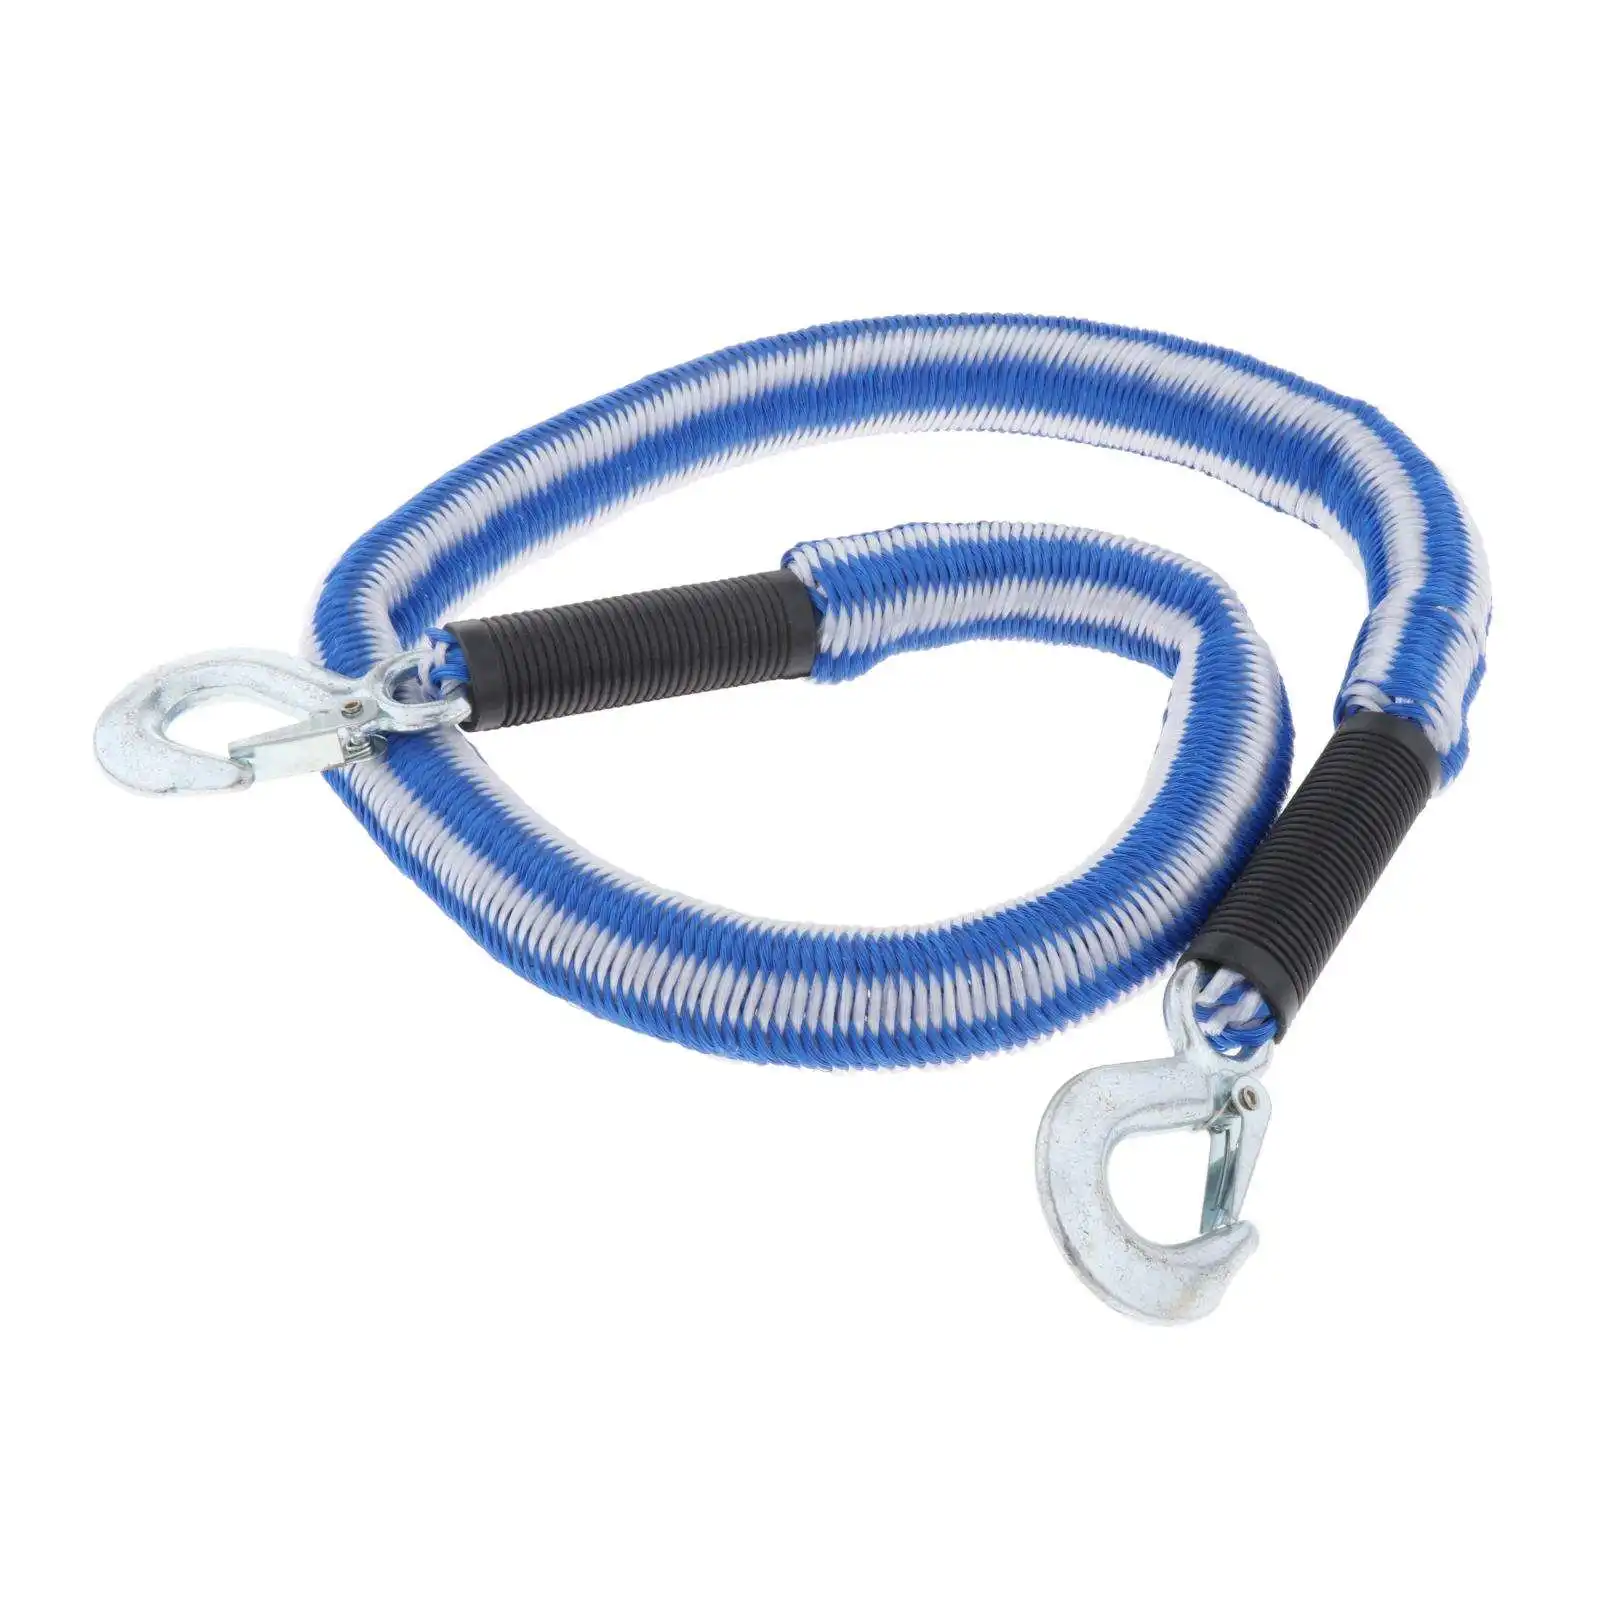 1 Ton Car Towing Rope Recovery Tow Strap with Safety Hooks 125x4cm, Easy to Install and Remove